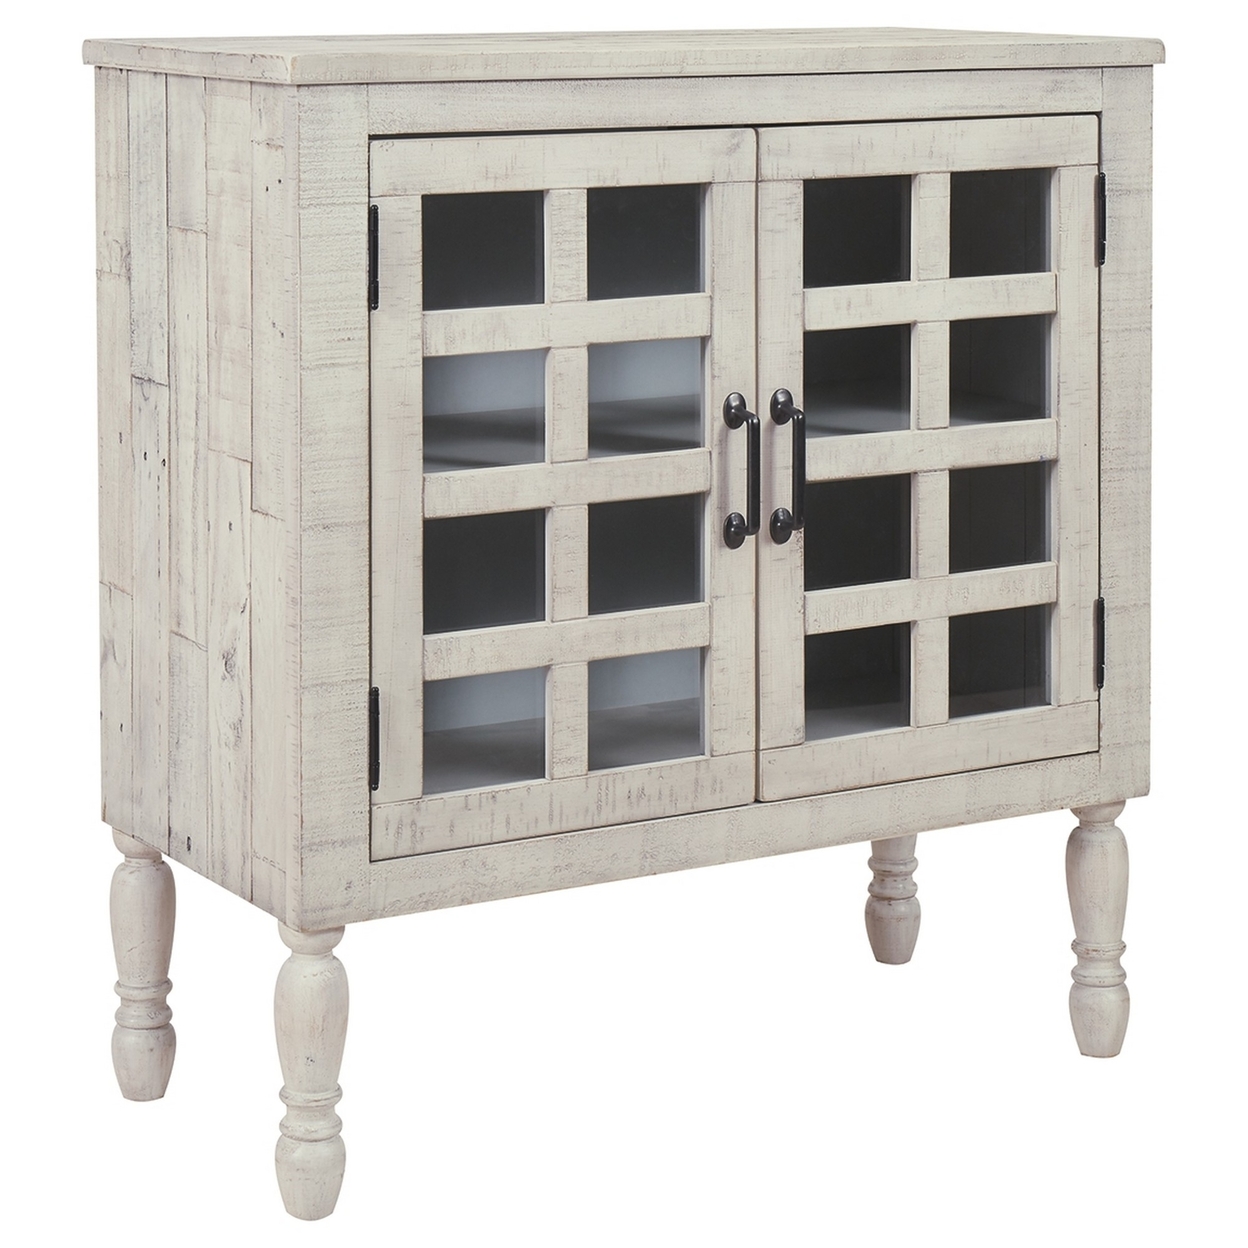 2 Glass Inlay Door Wooden Accent Cabinet with Turned Legs Antique White - Saltoro Sherpi - image 1 of 5